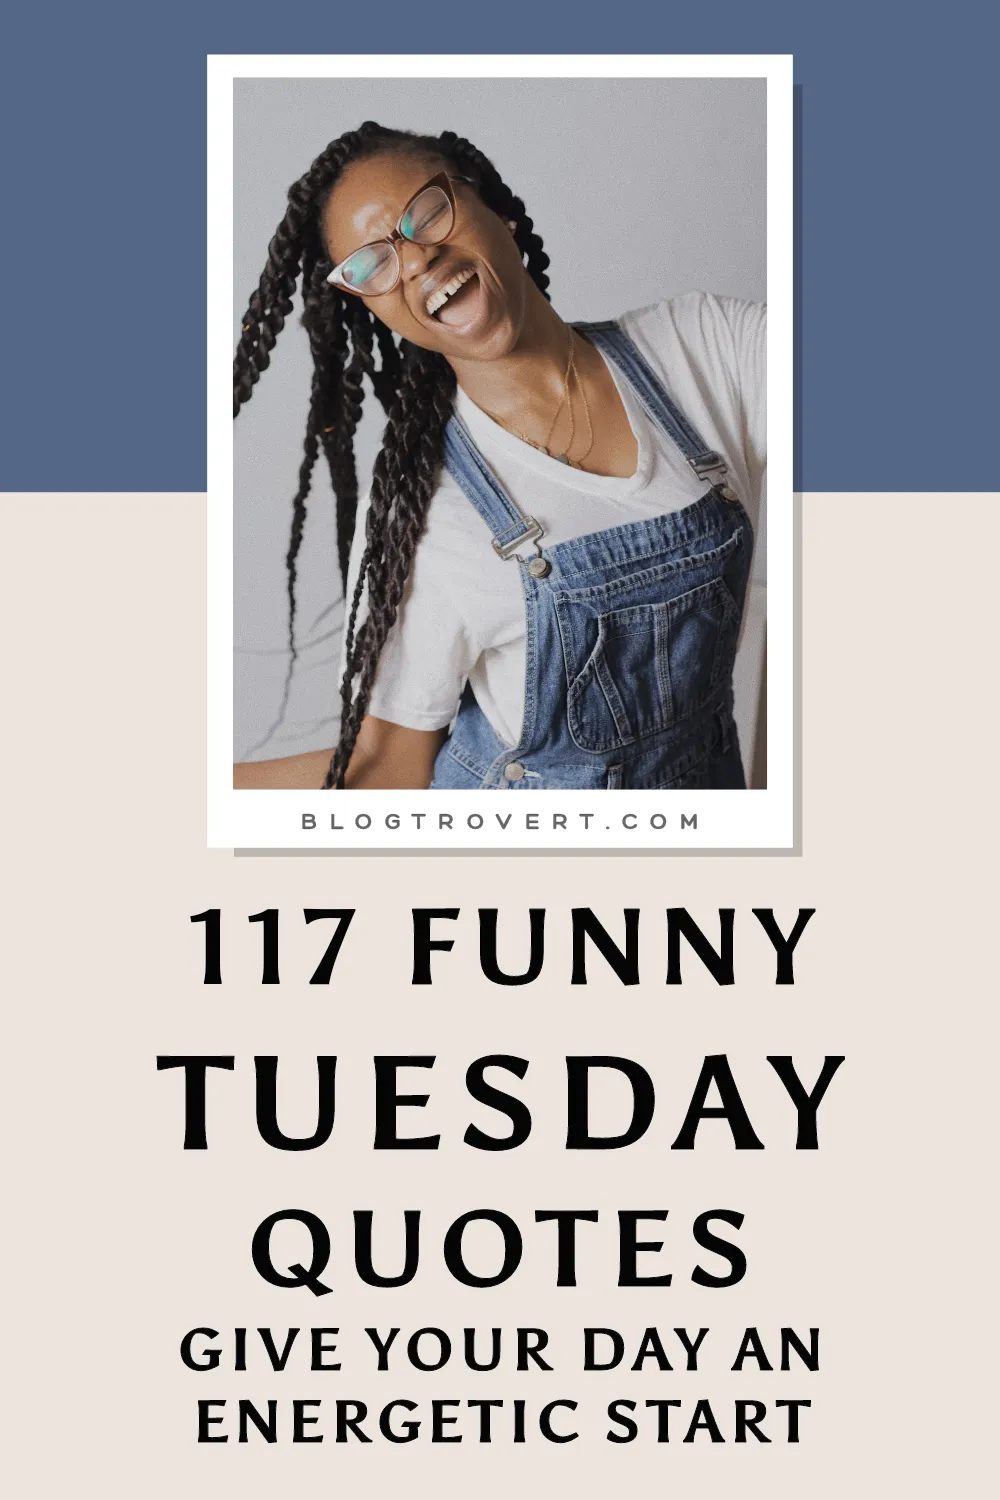 117 Funny Tuesday Quotes to Brighten Your Day 6